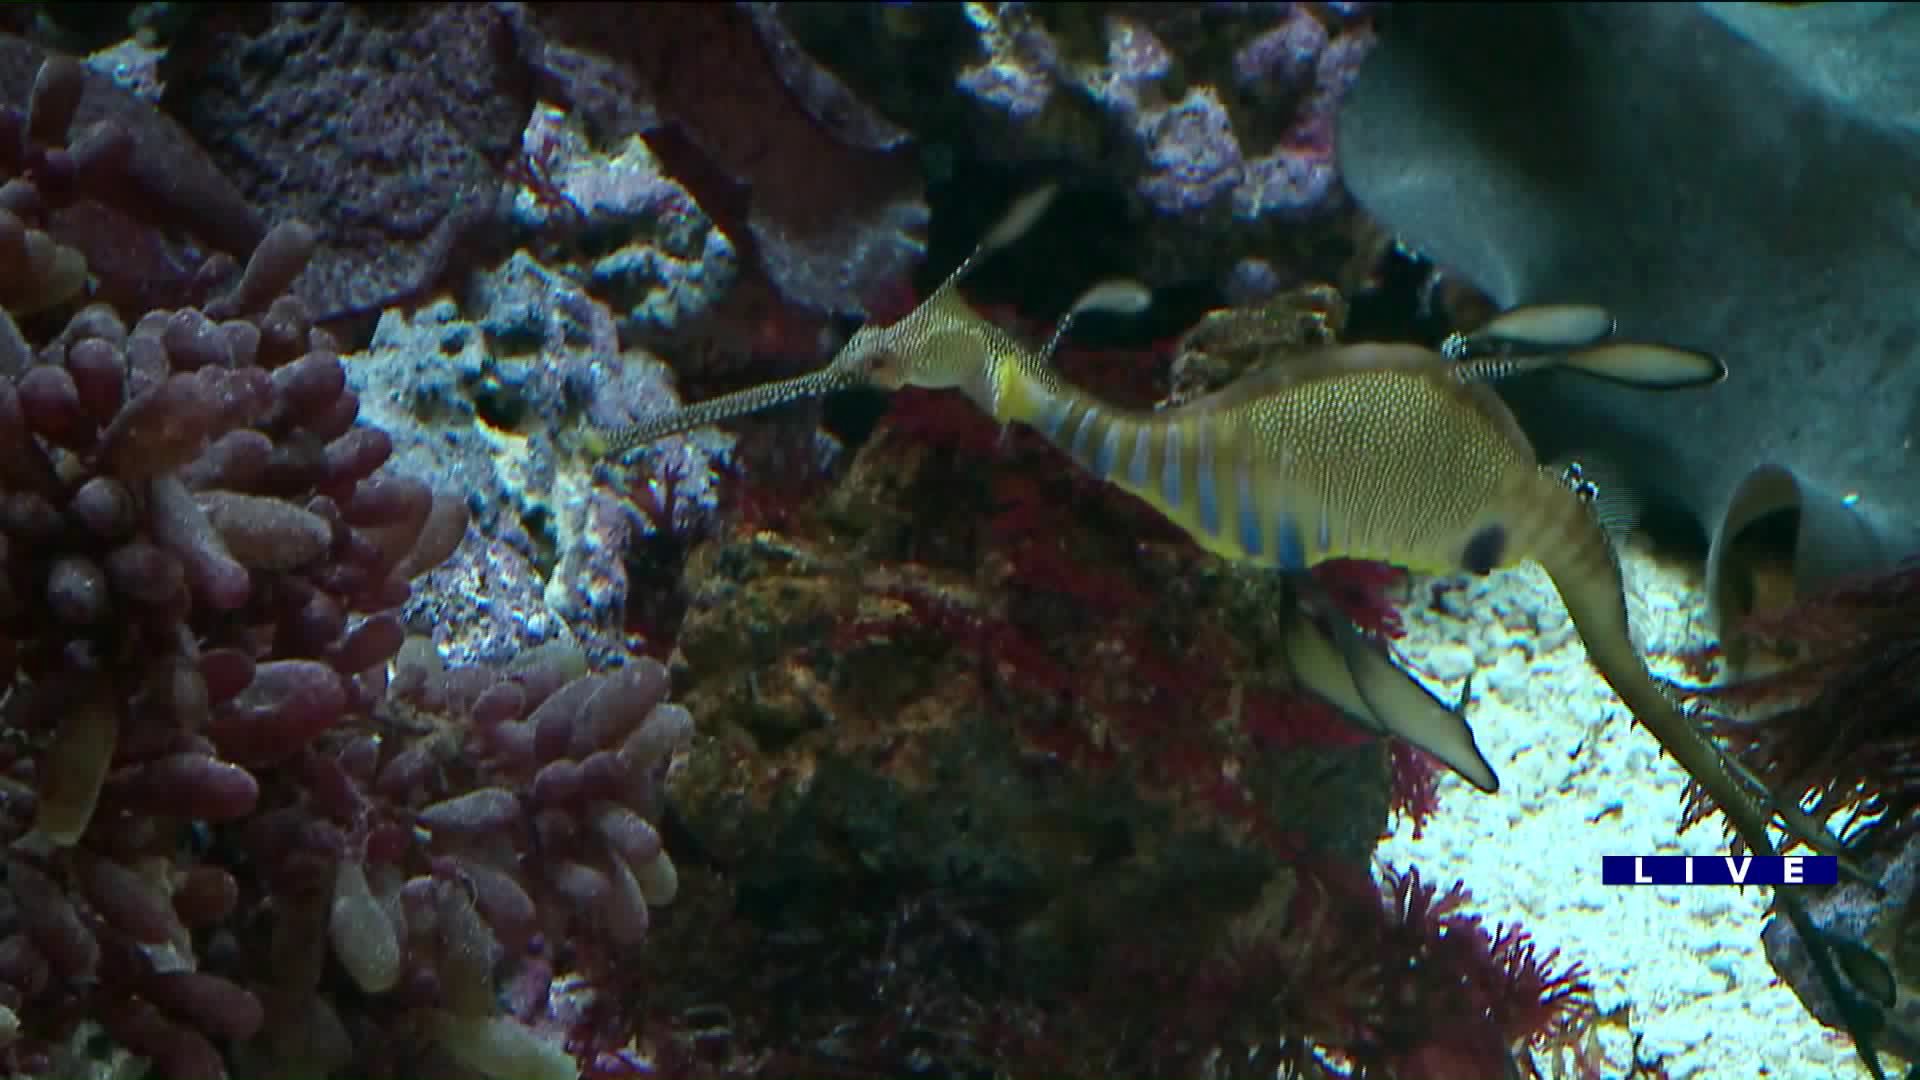 Around Town previews the new Underwater Beauty exhibit at the Shedd Aquarium